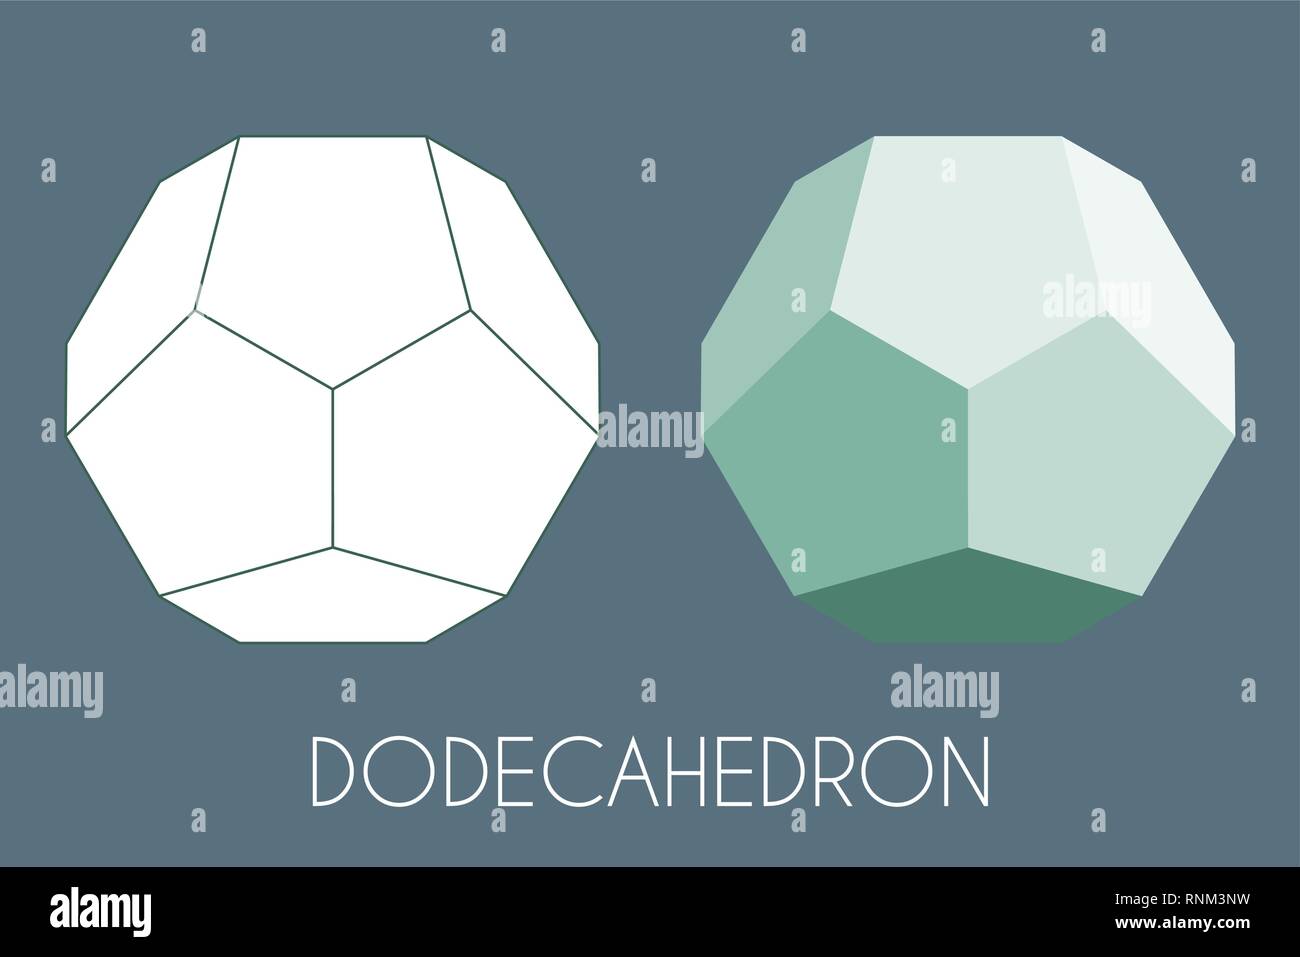 Dodecahedron Platonic solid. Sacred geometry vector illustration Stock Vector